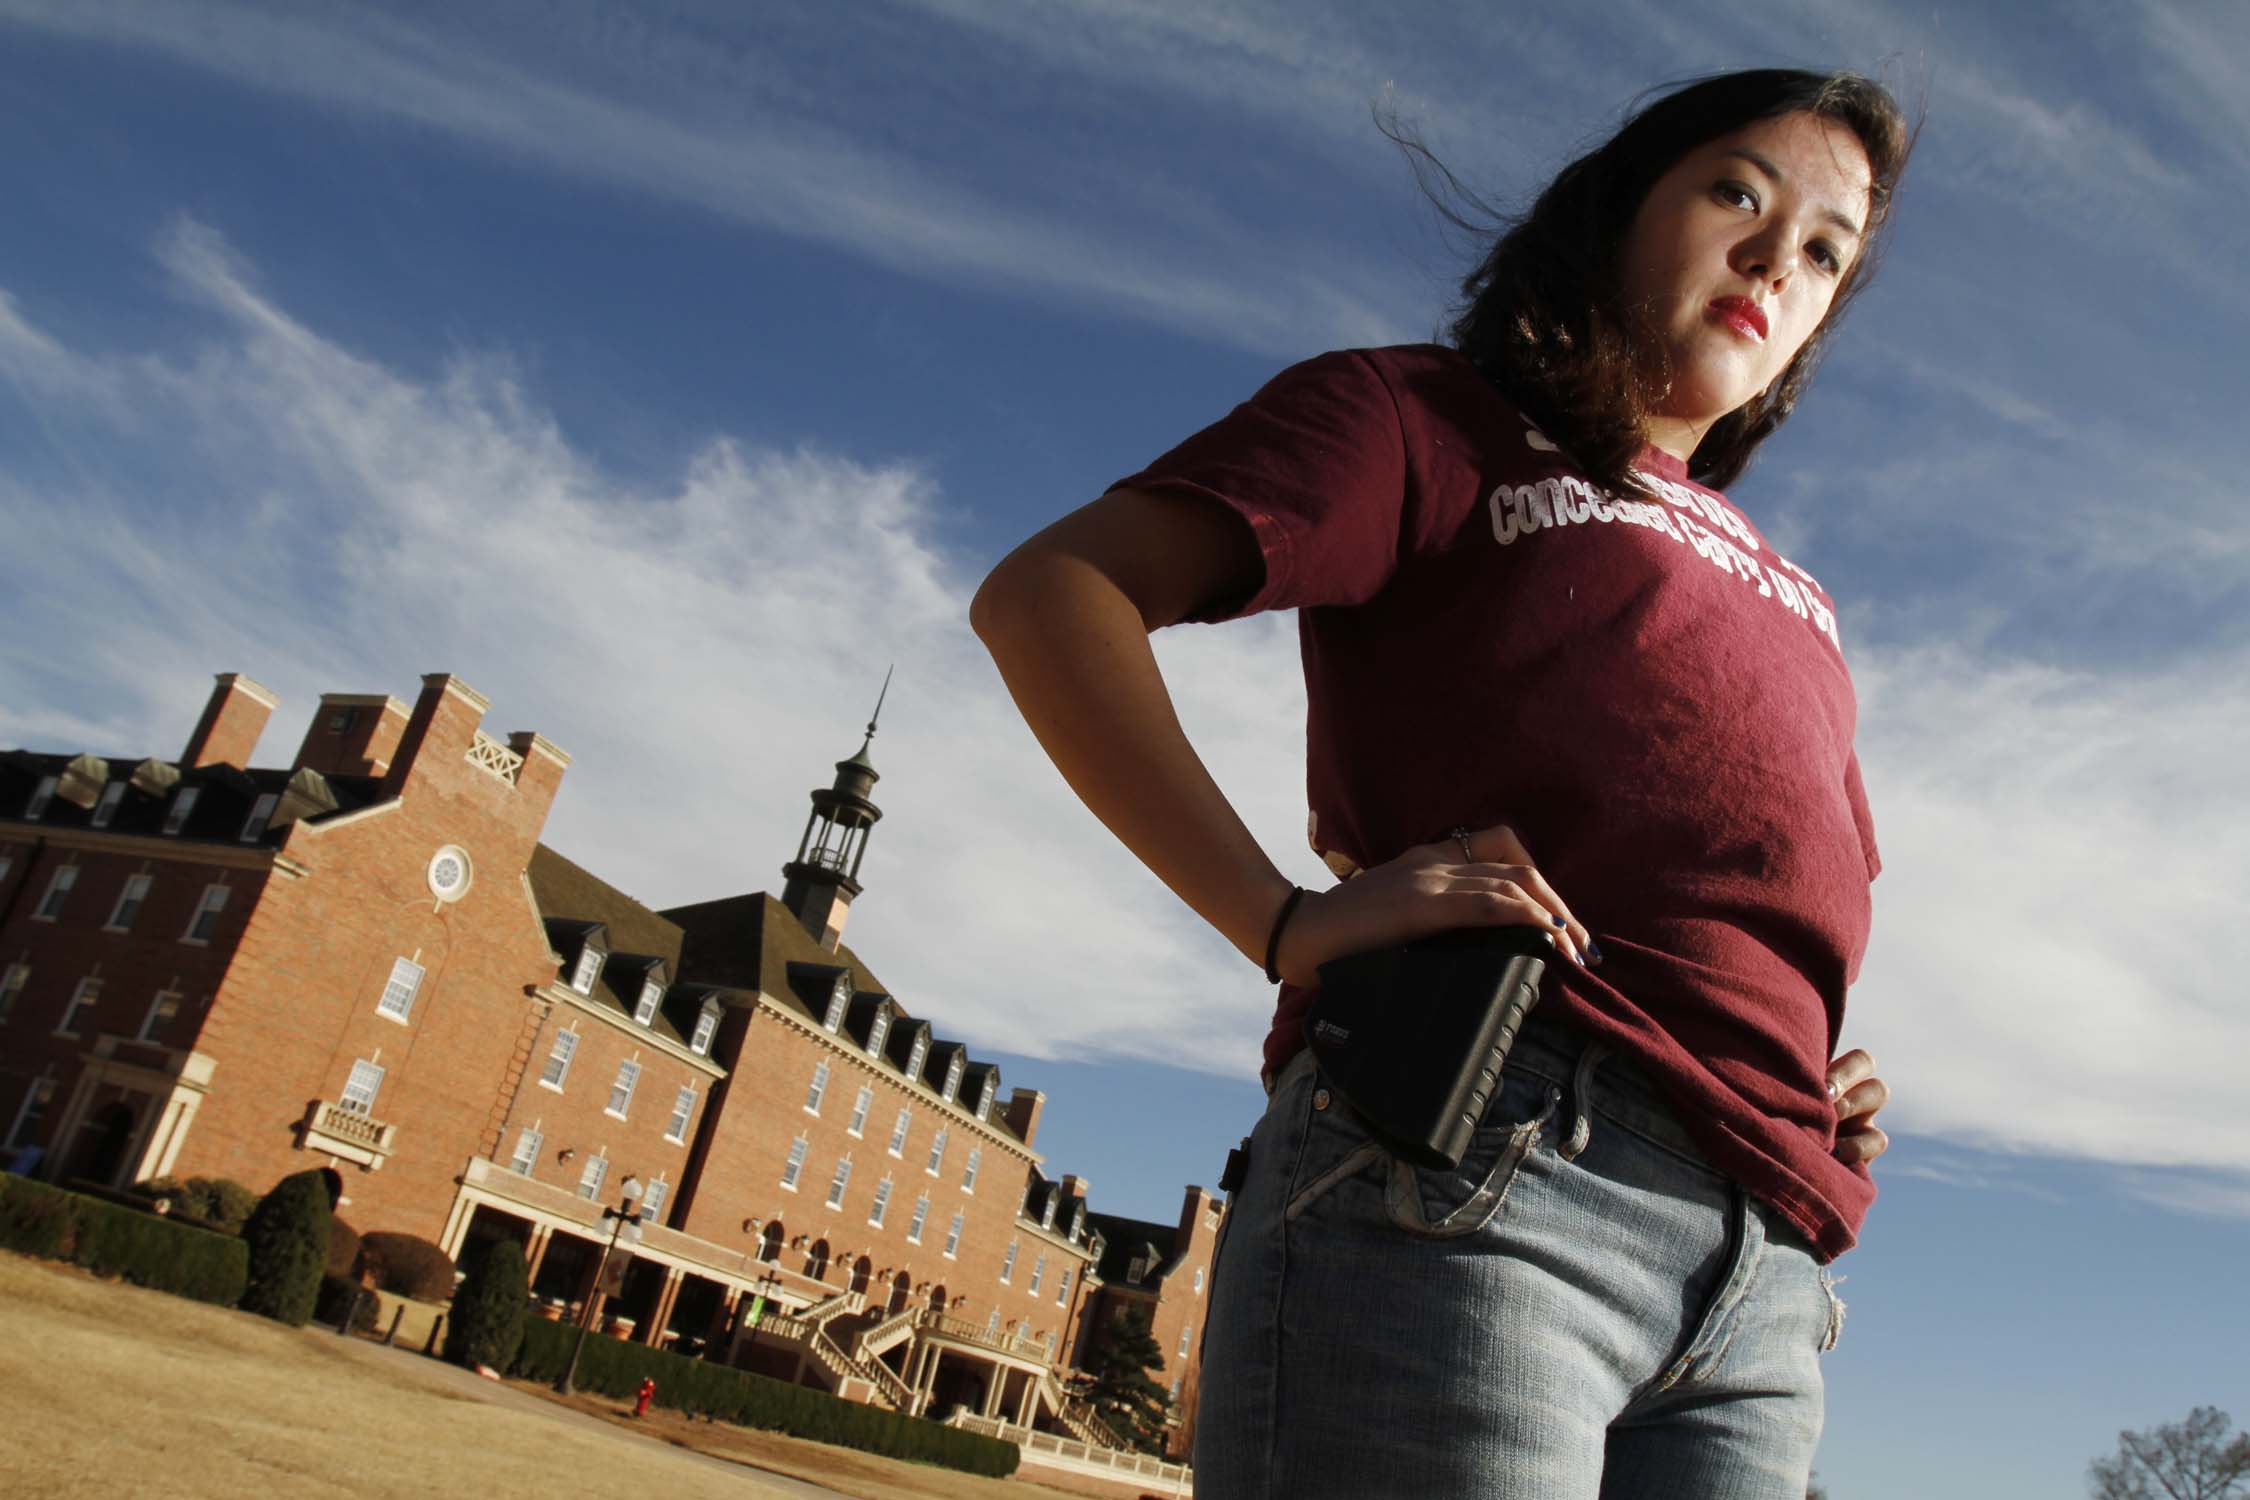 Campus Carry: The Movement to Allow Guns on College Grounds, Explained